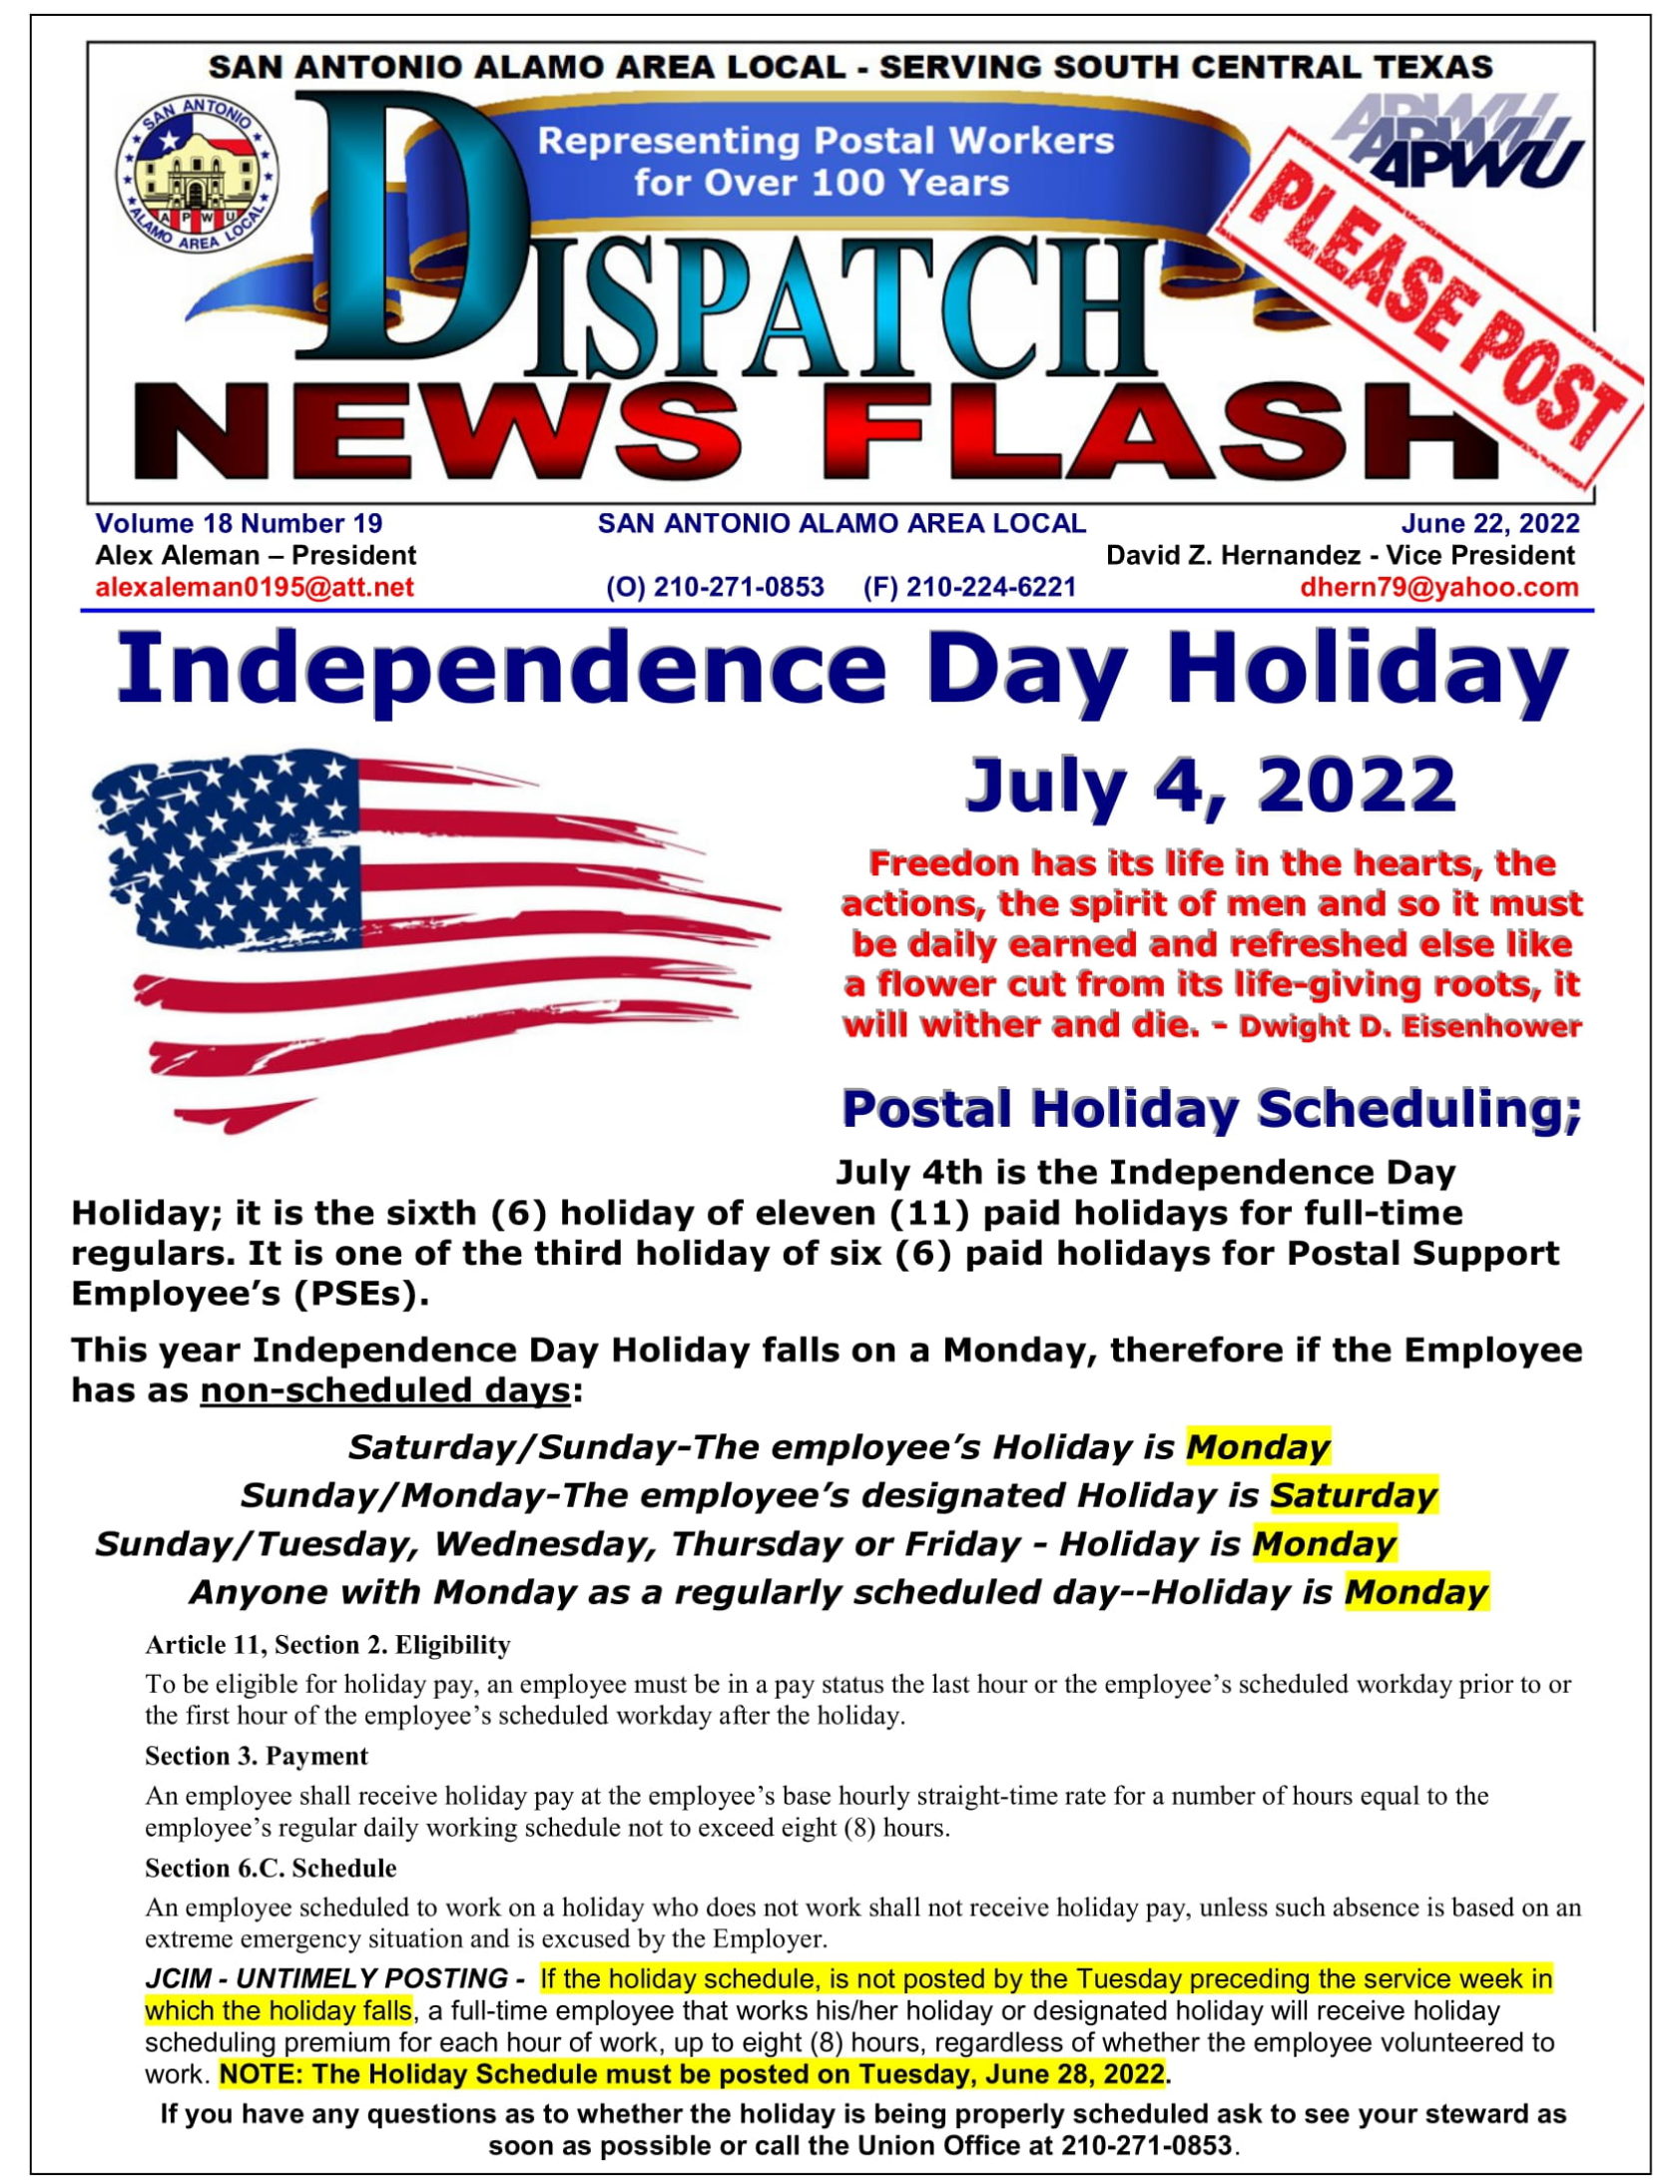 Independence Day Holiday - 